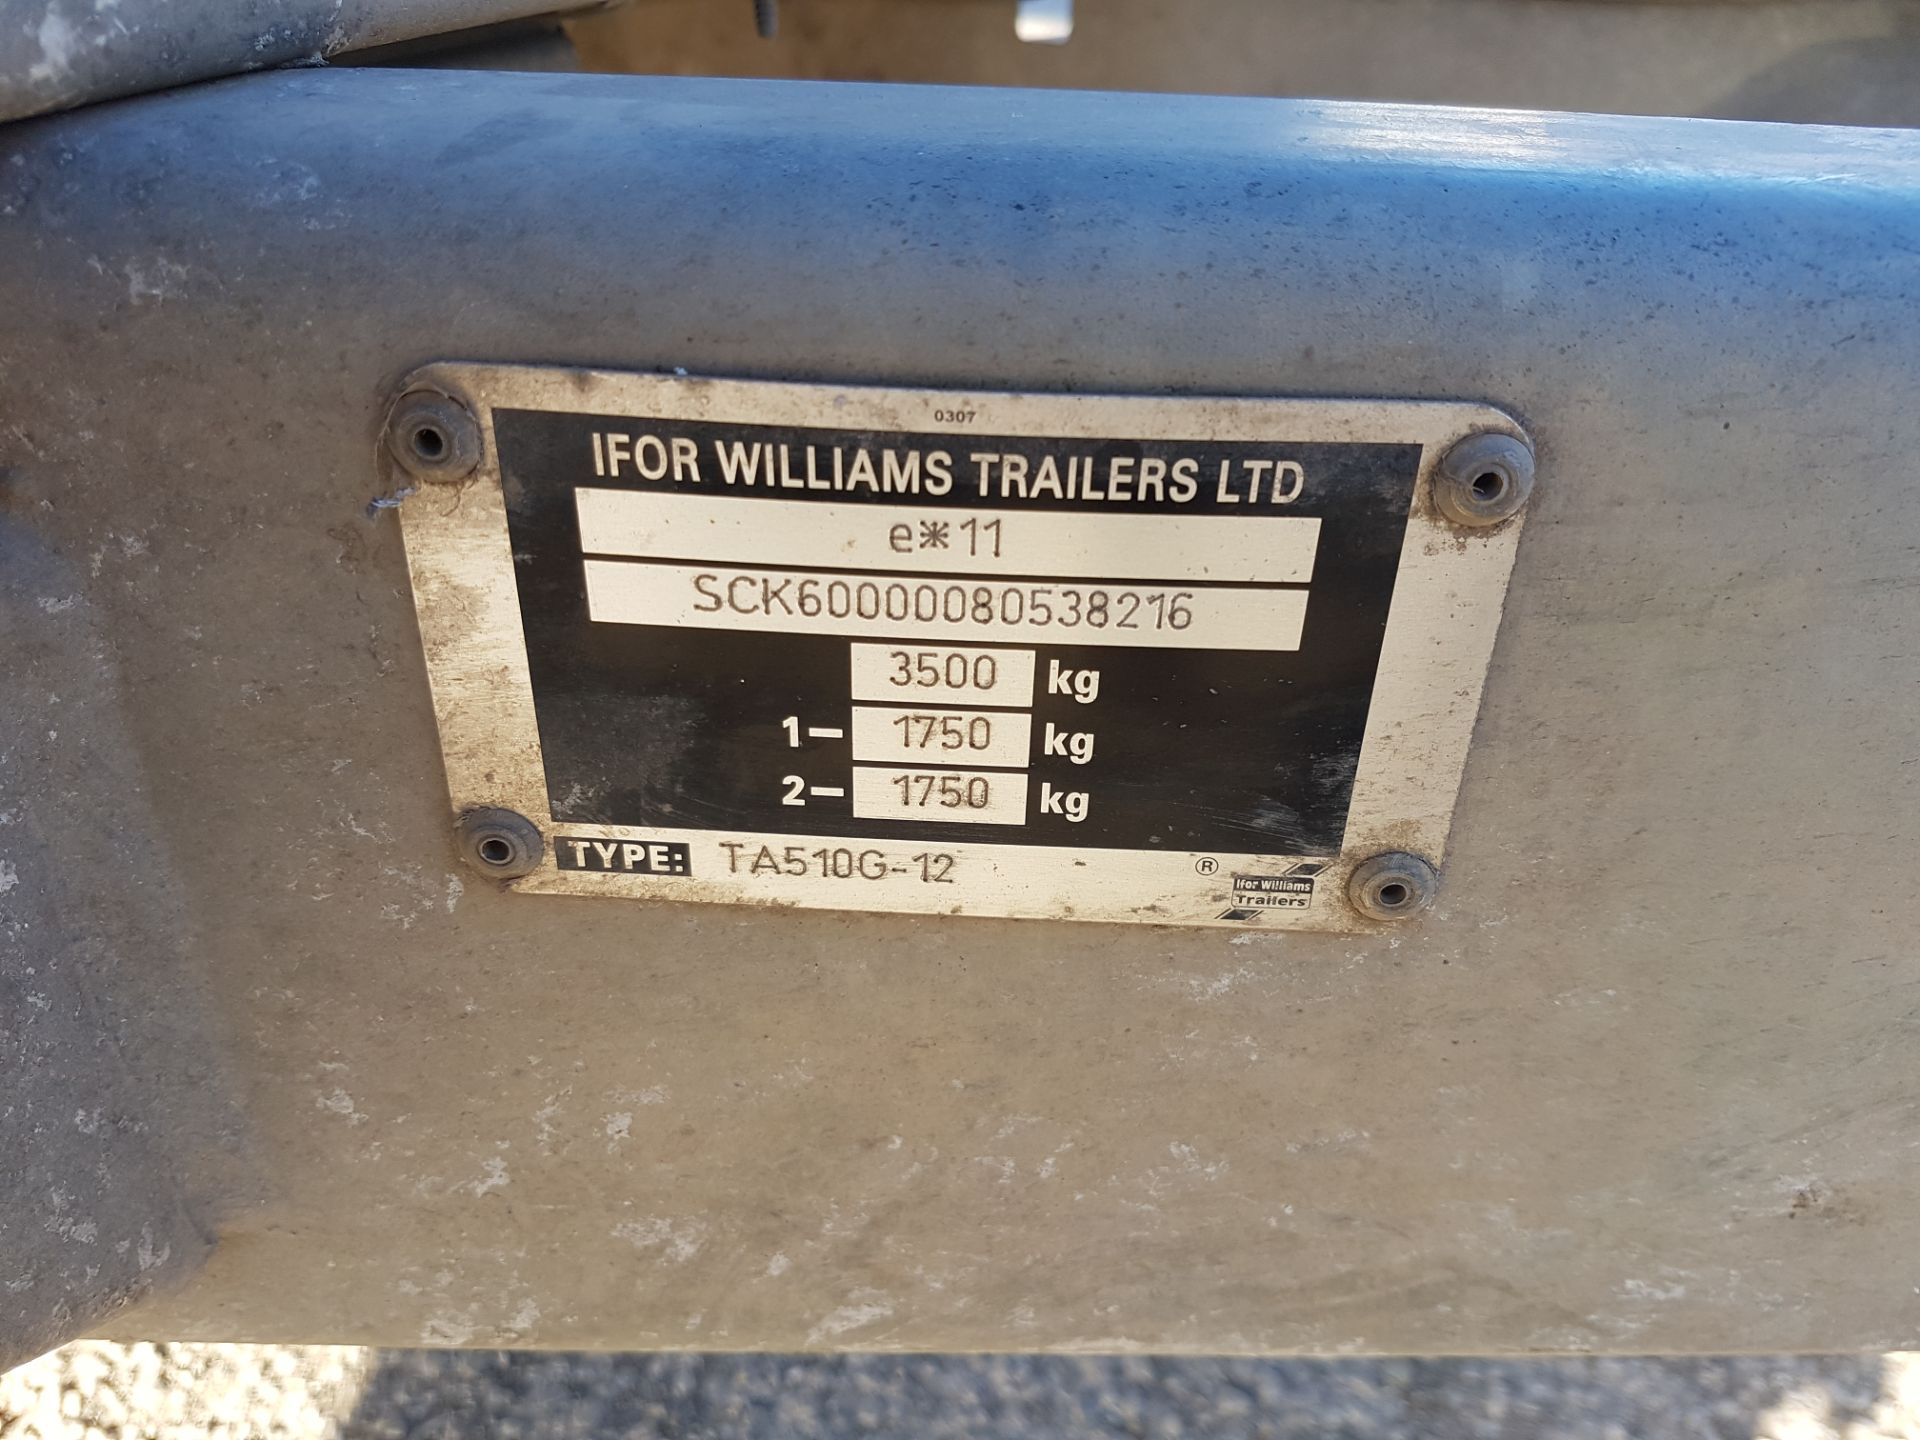 K - 2008 TA-510 LIVESTOCK IFOR WILLIAMS TWIN AXLE TRAILER FITTED WITH SHEET DECKS    YEAR: 2008 TA- - Image 7 of 14